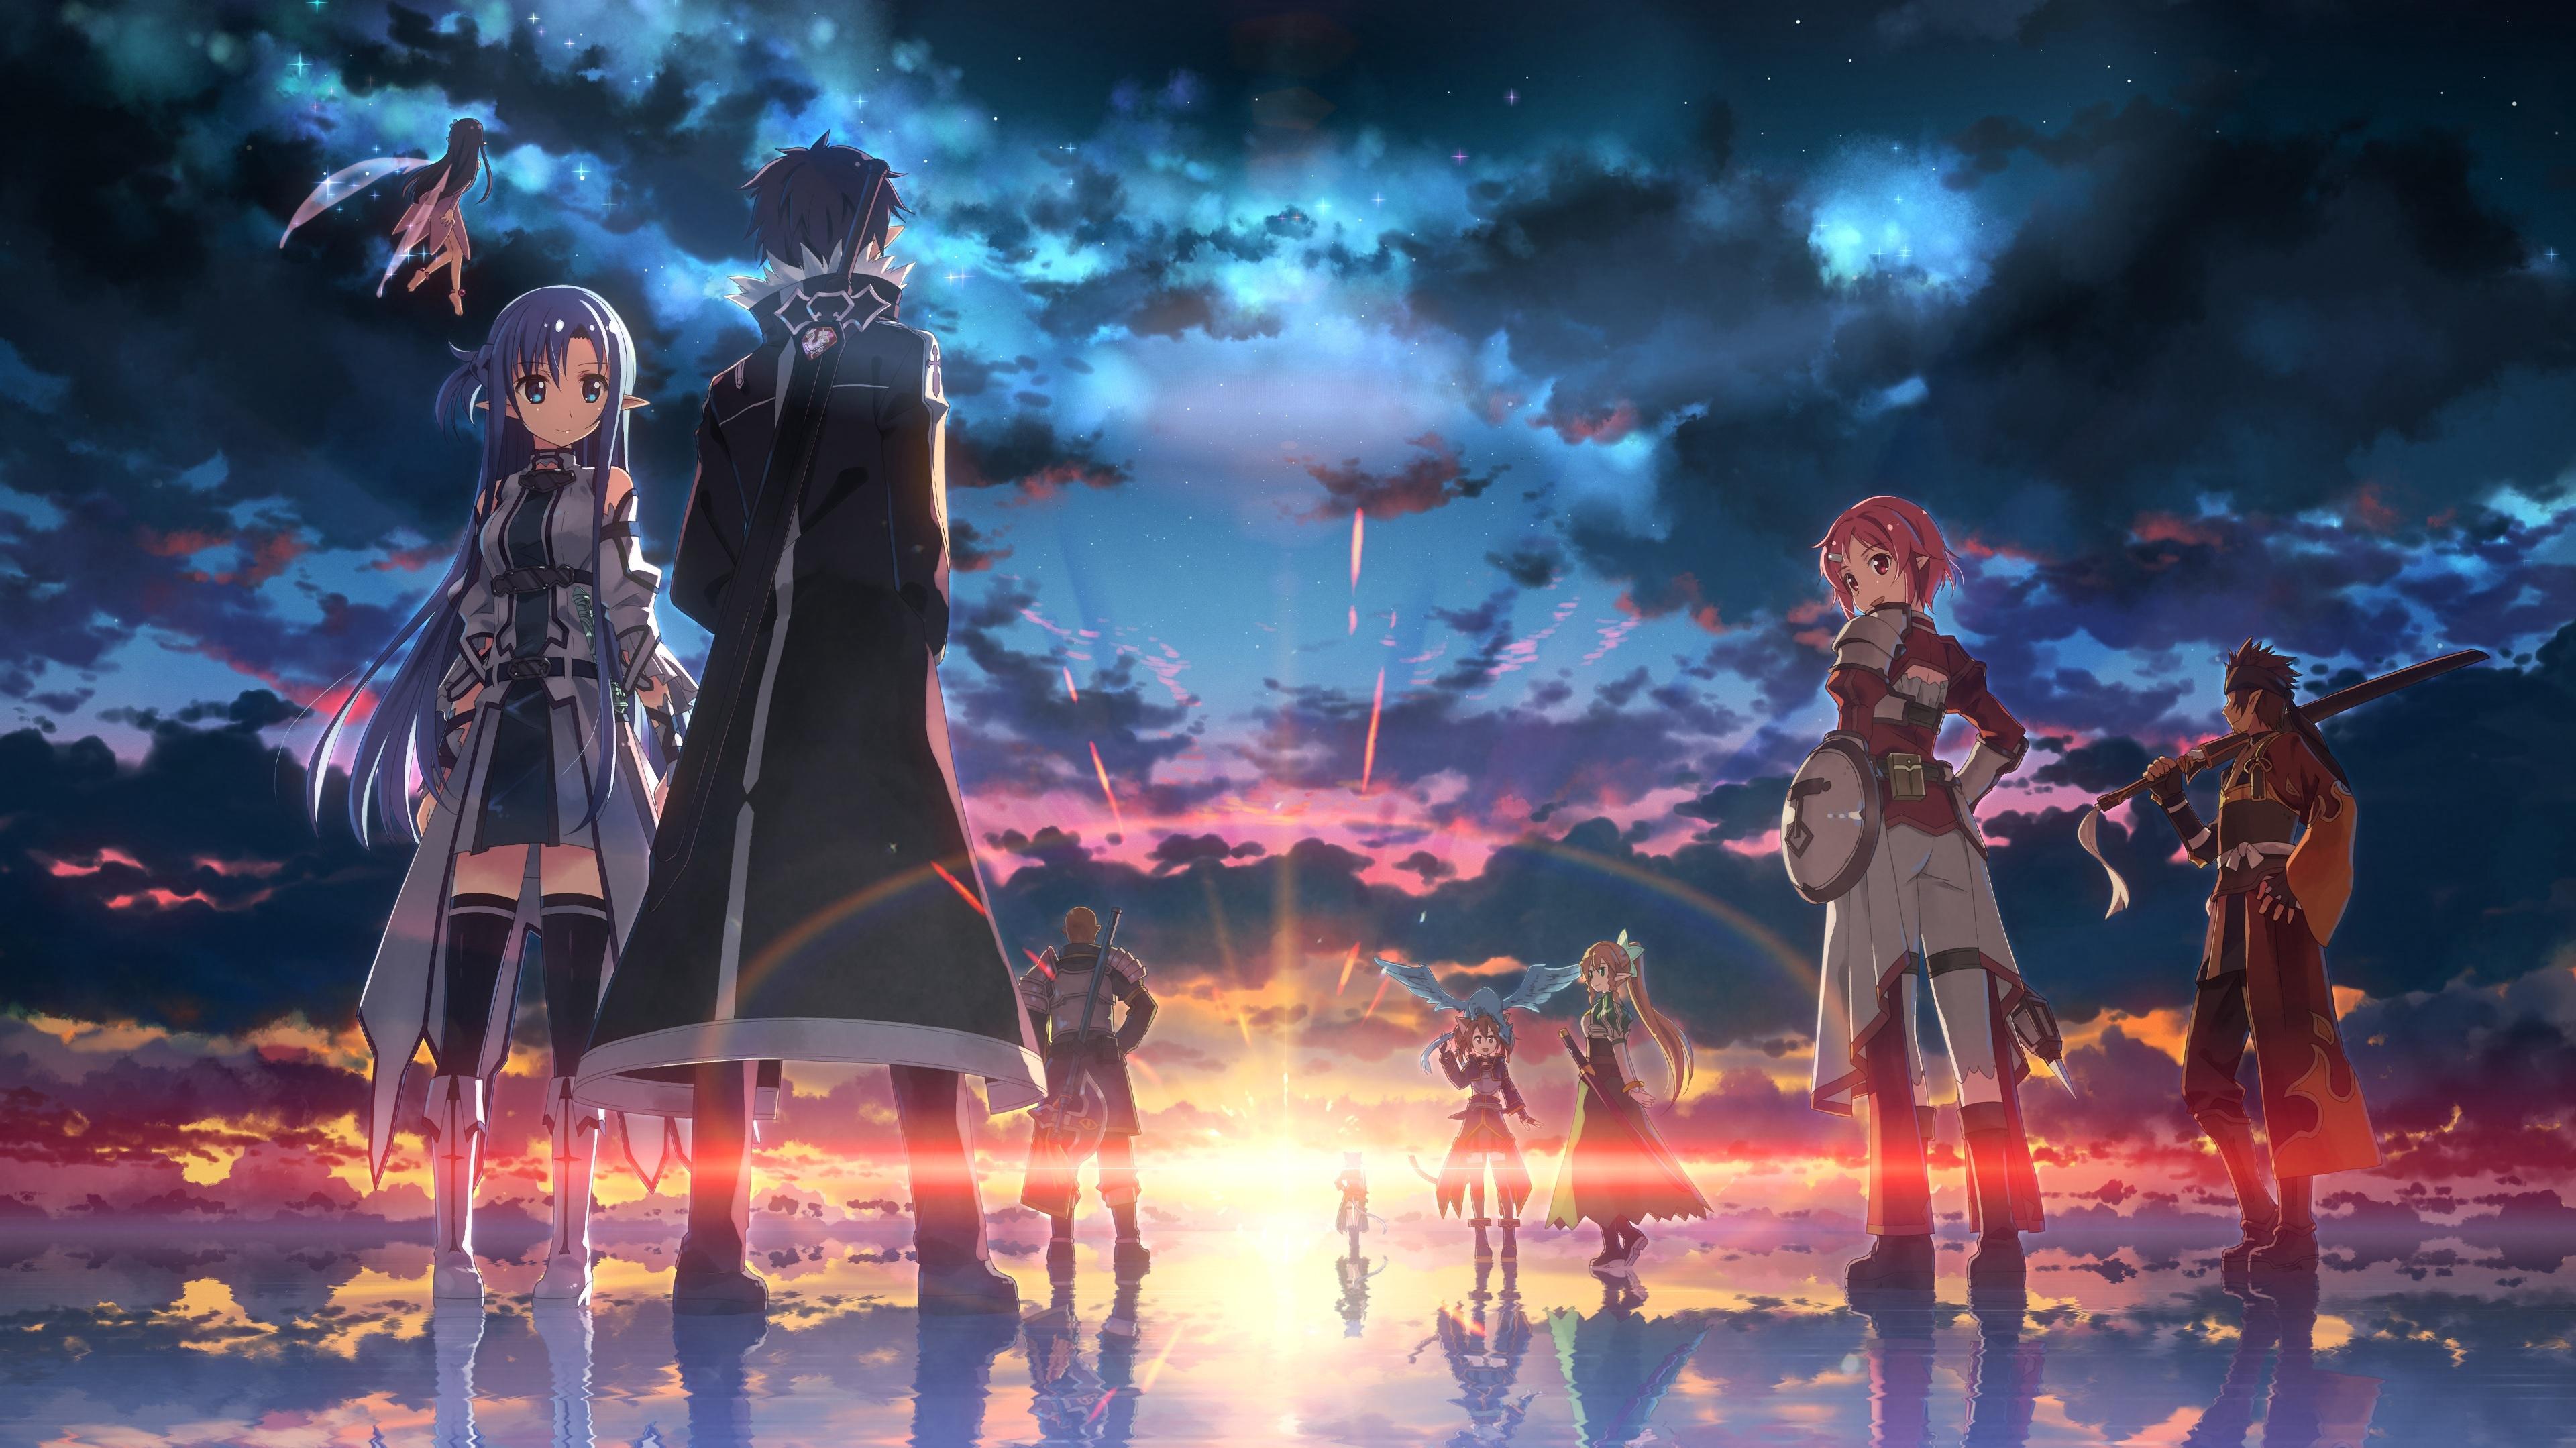  Sword Art Online HD Wallpapers and Backgrounds